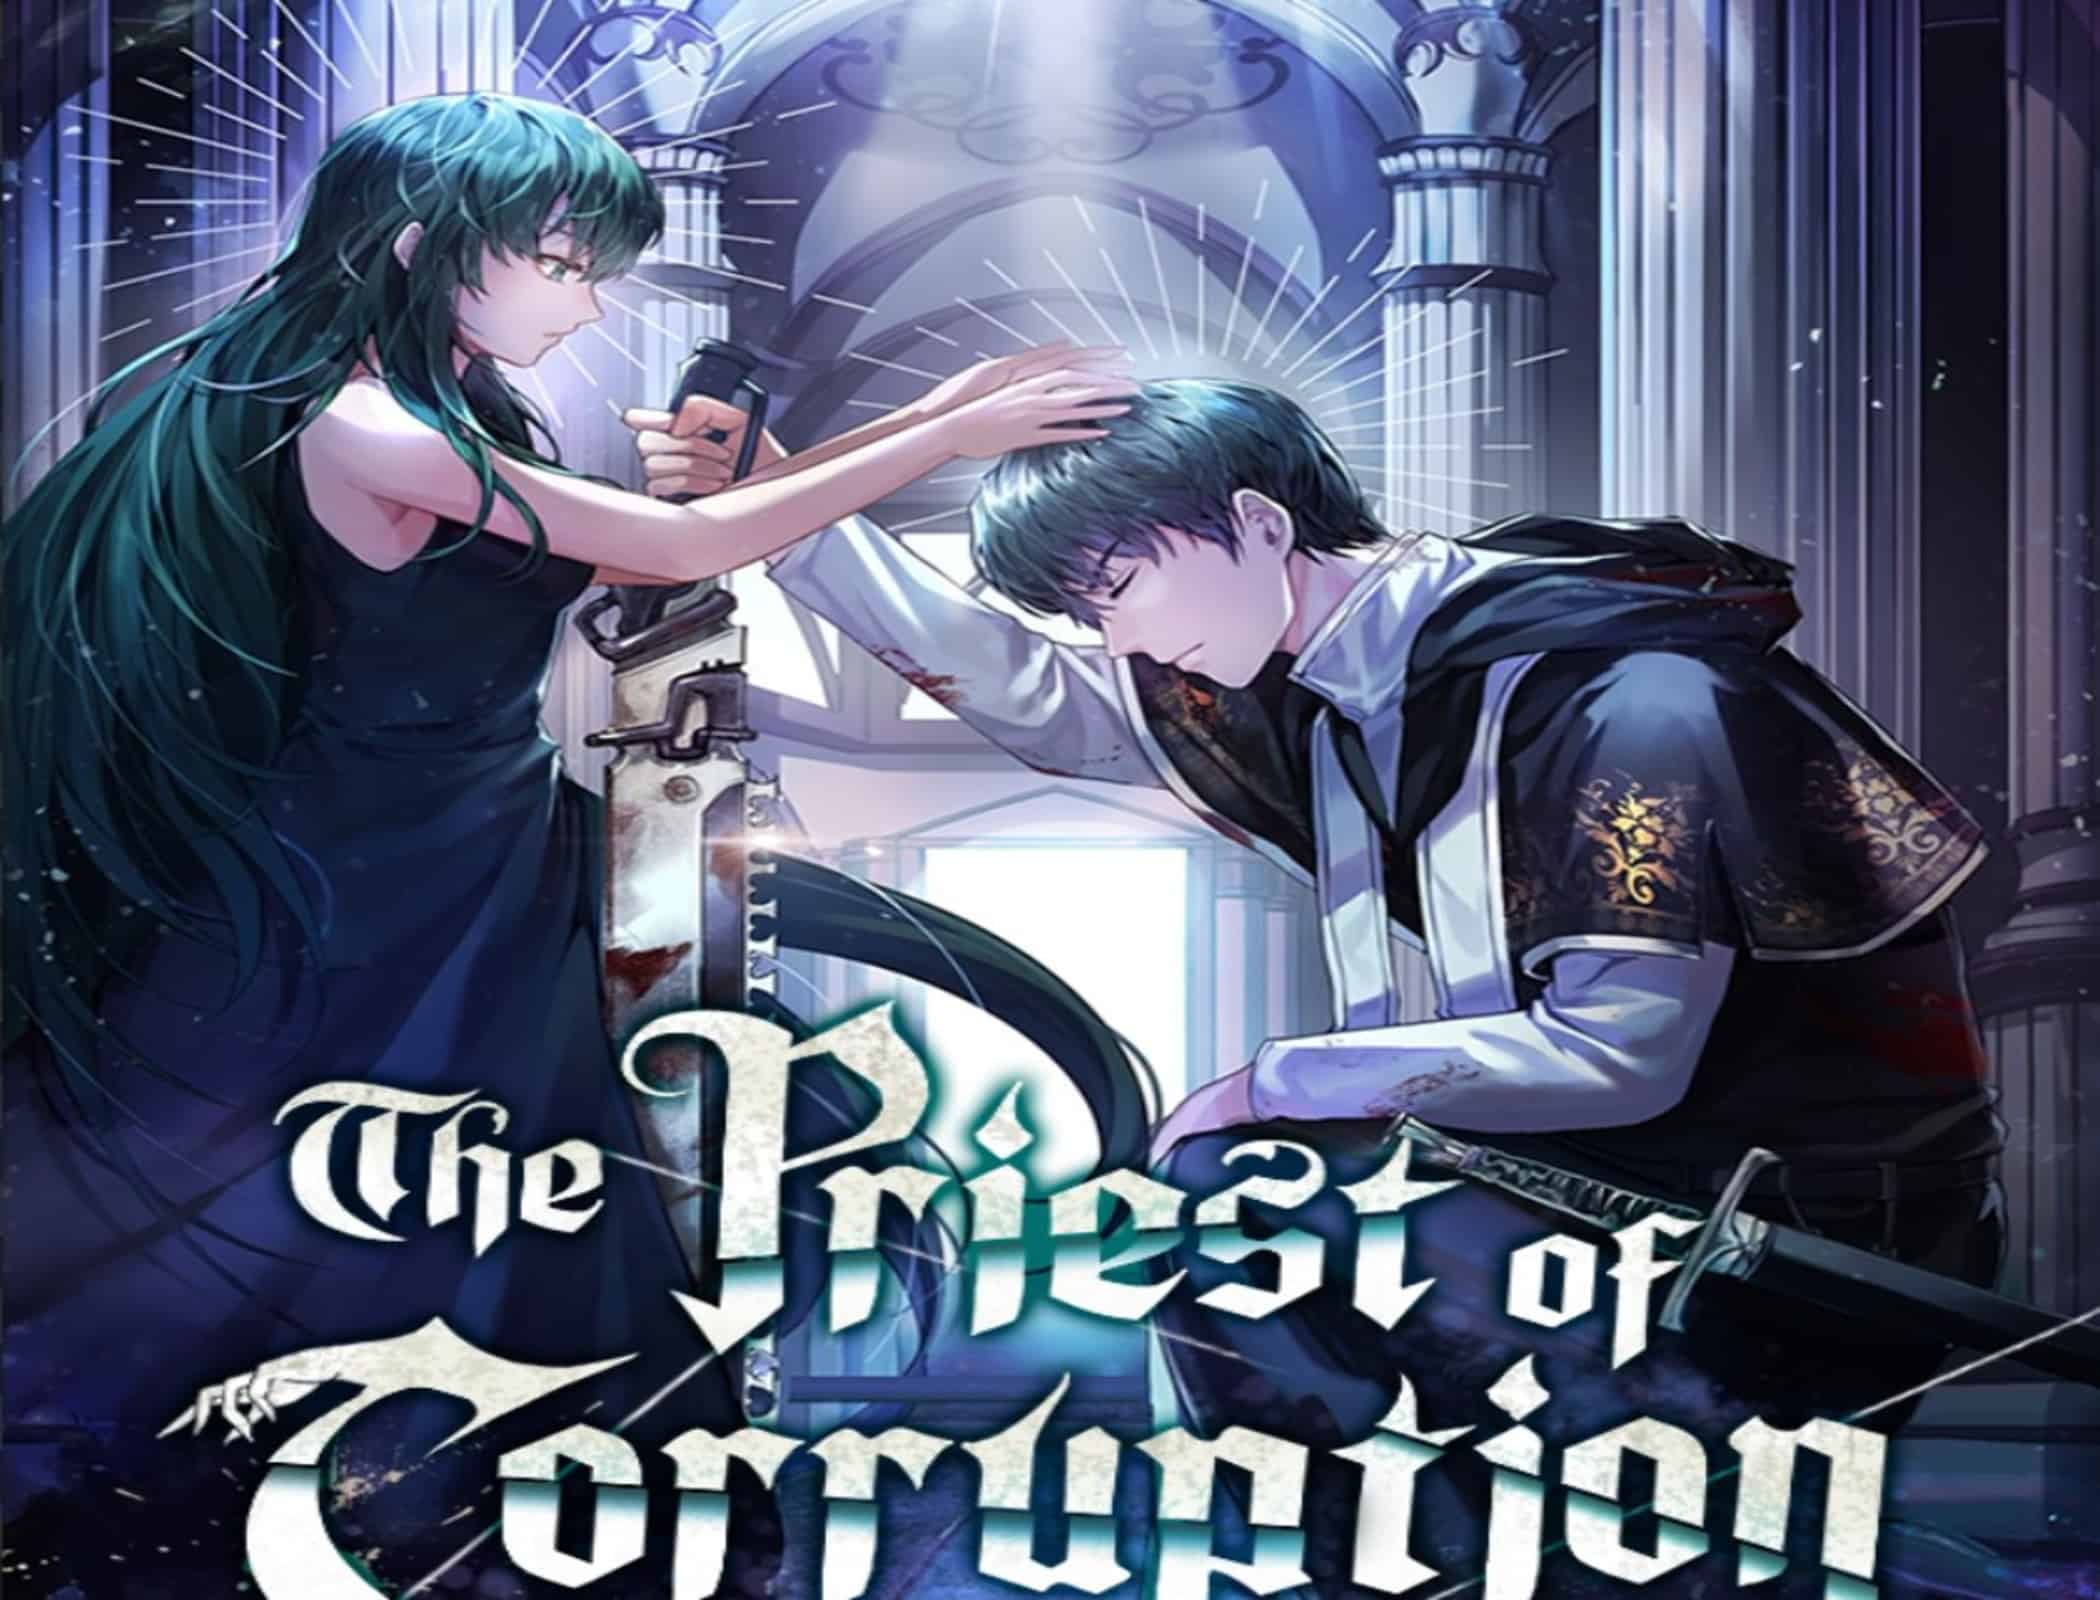 The Priest of Corruption